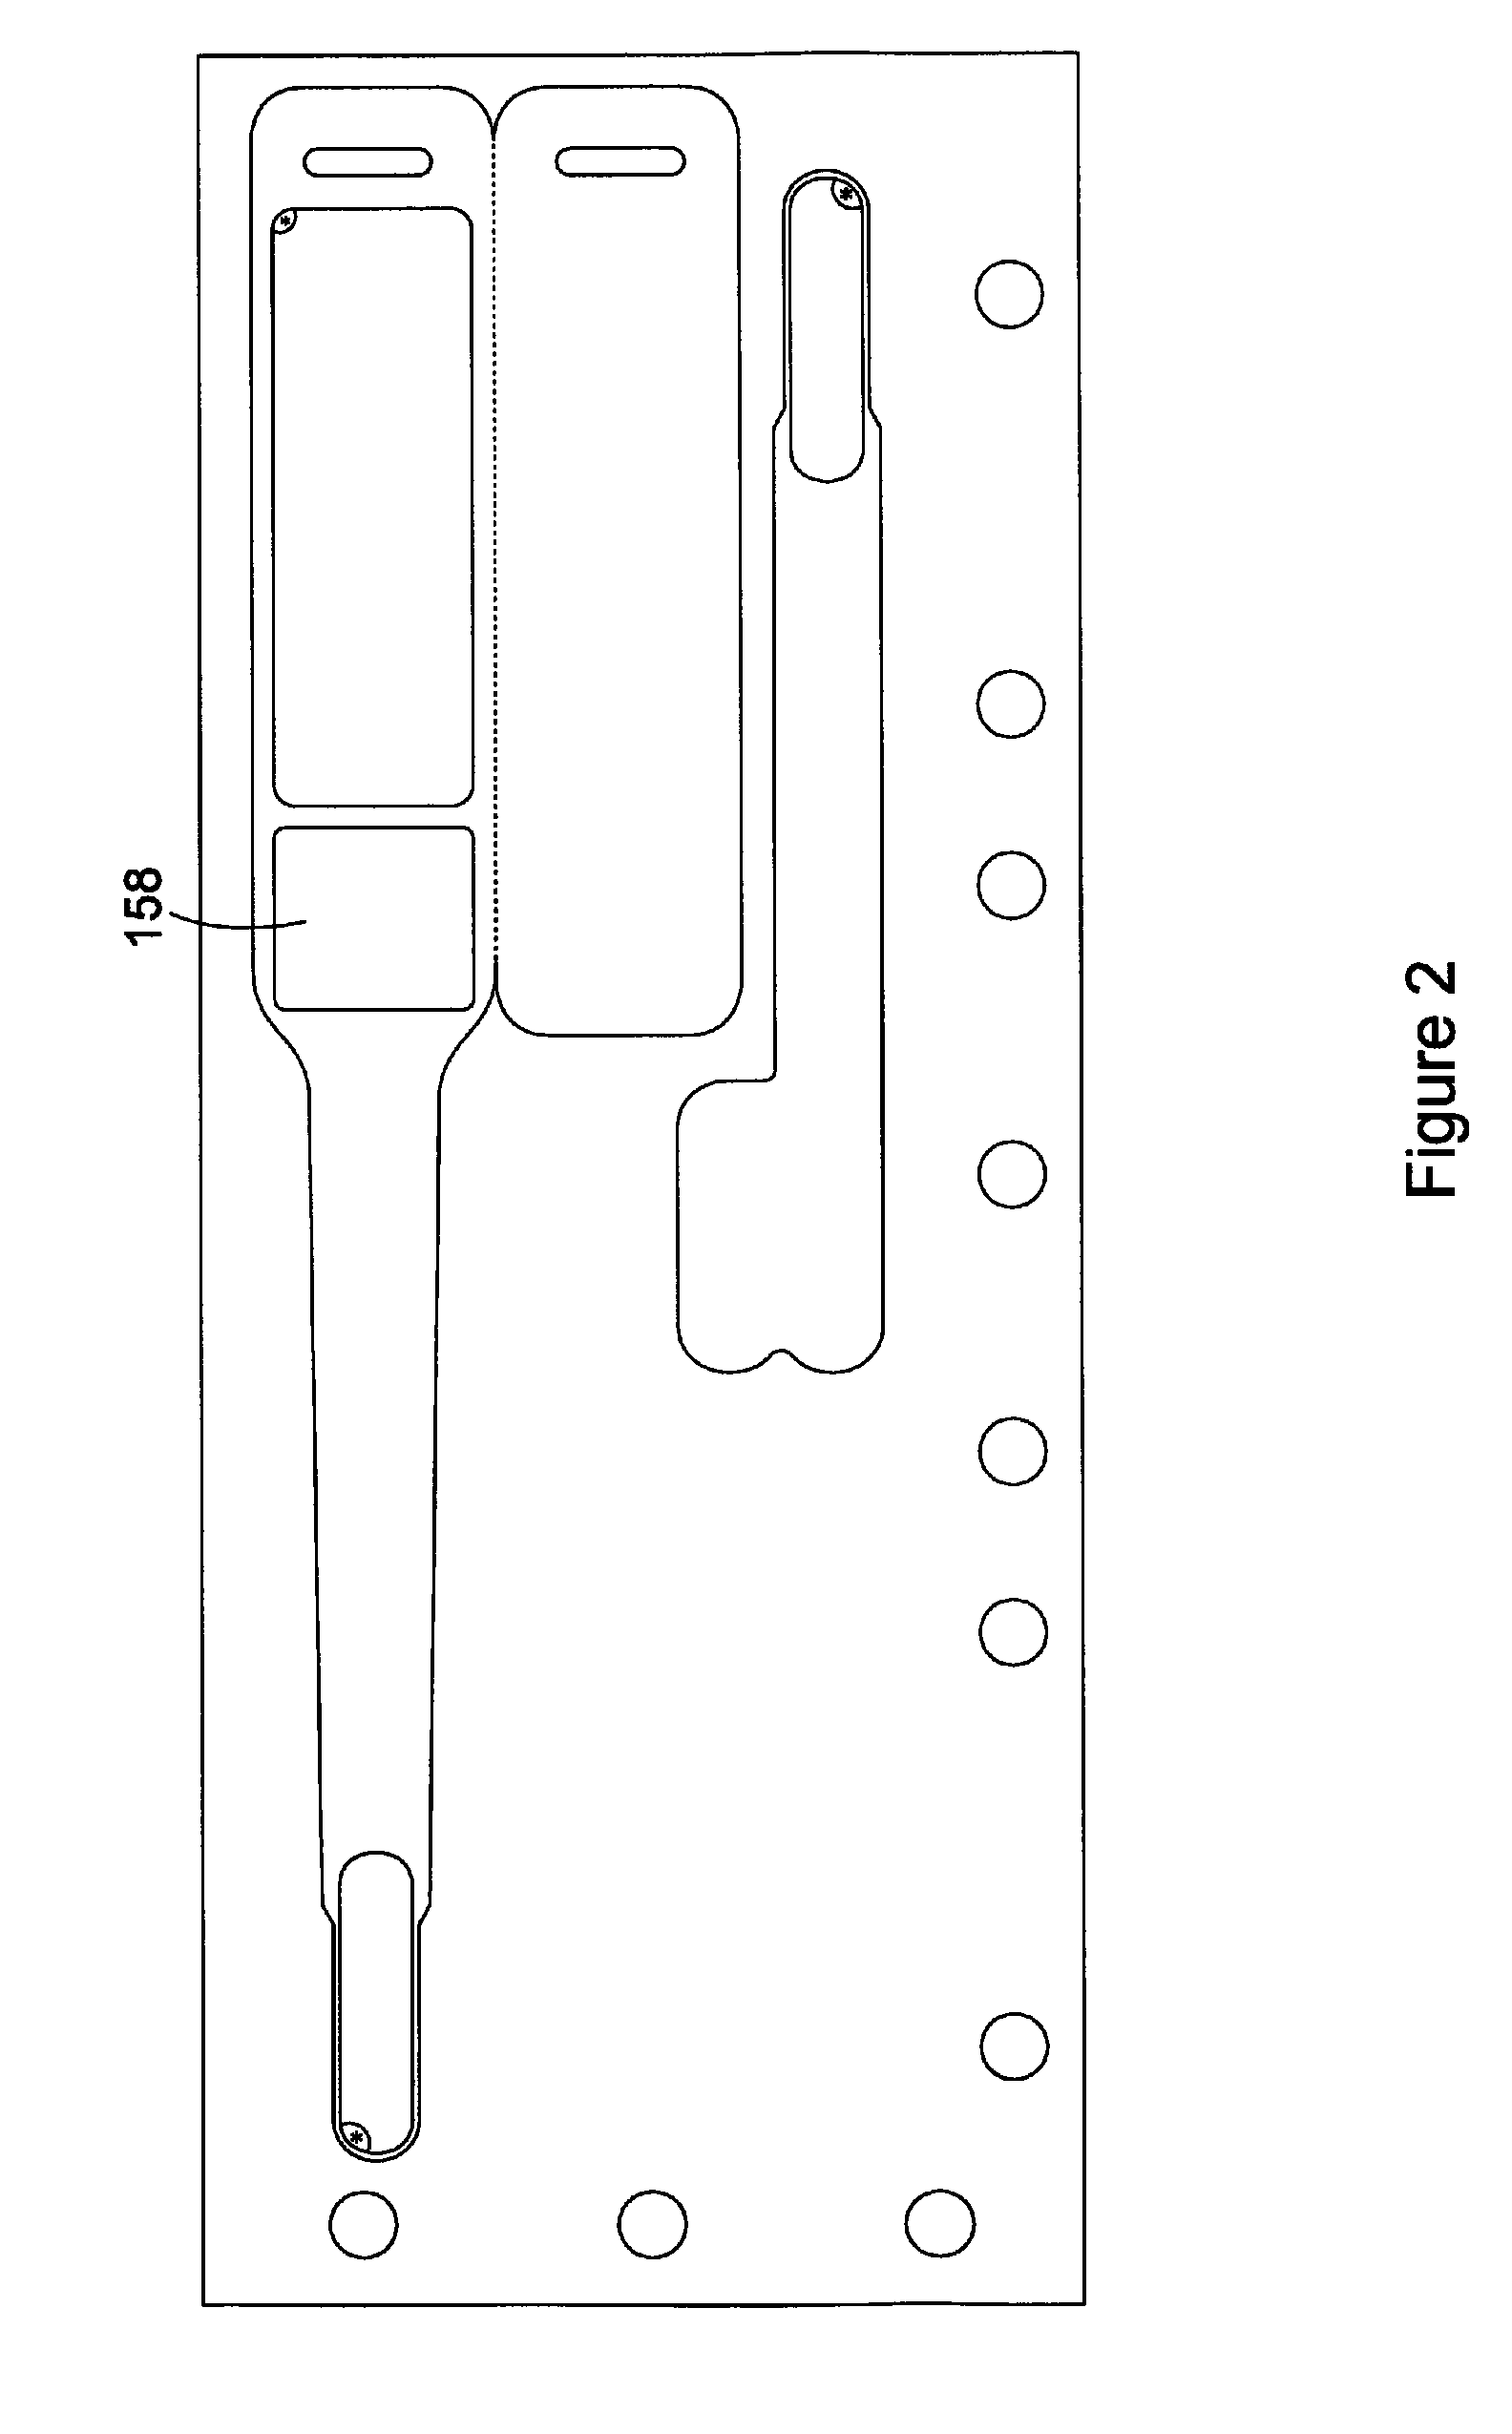 Business form comprising a wristband with multiple imaging areas